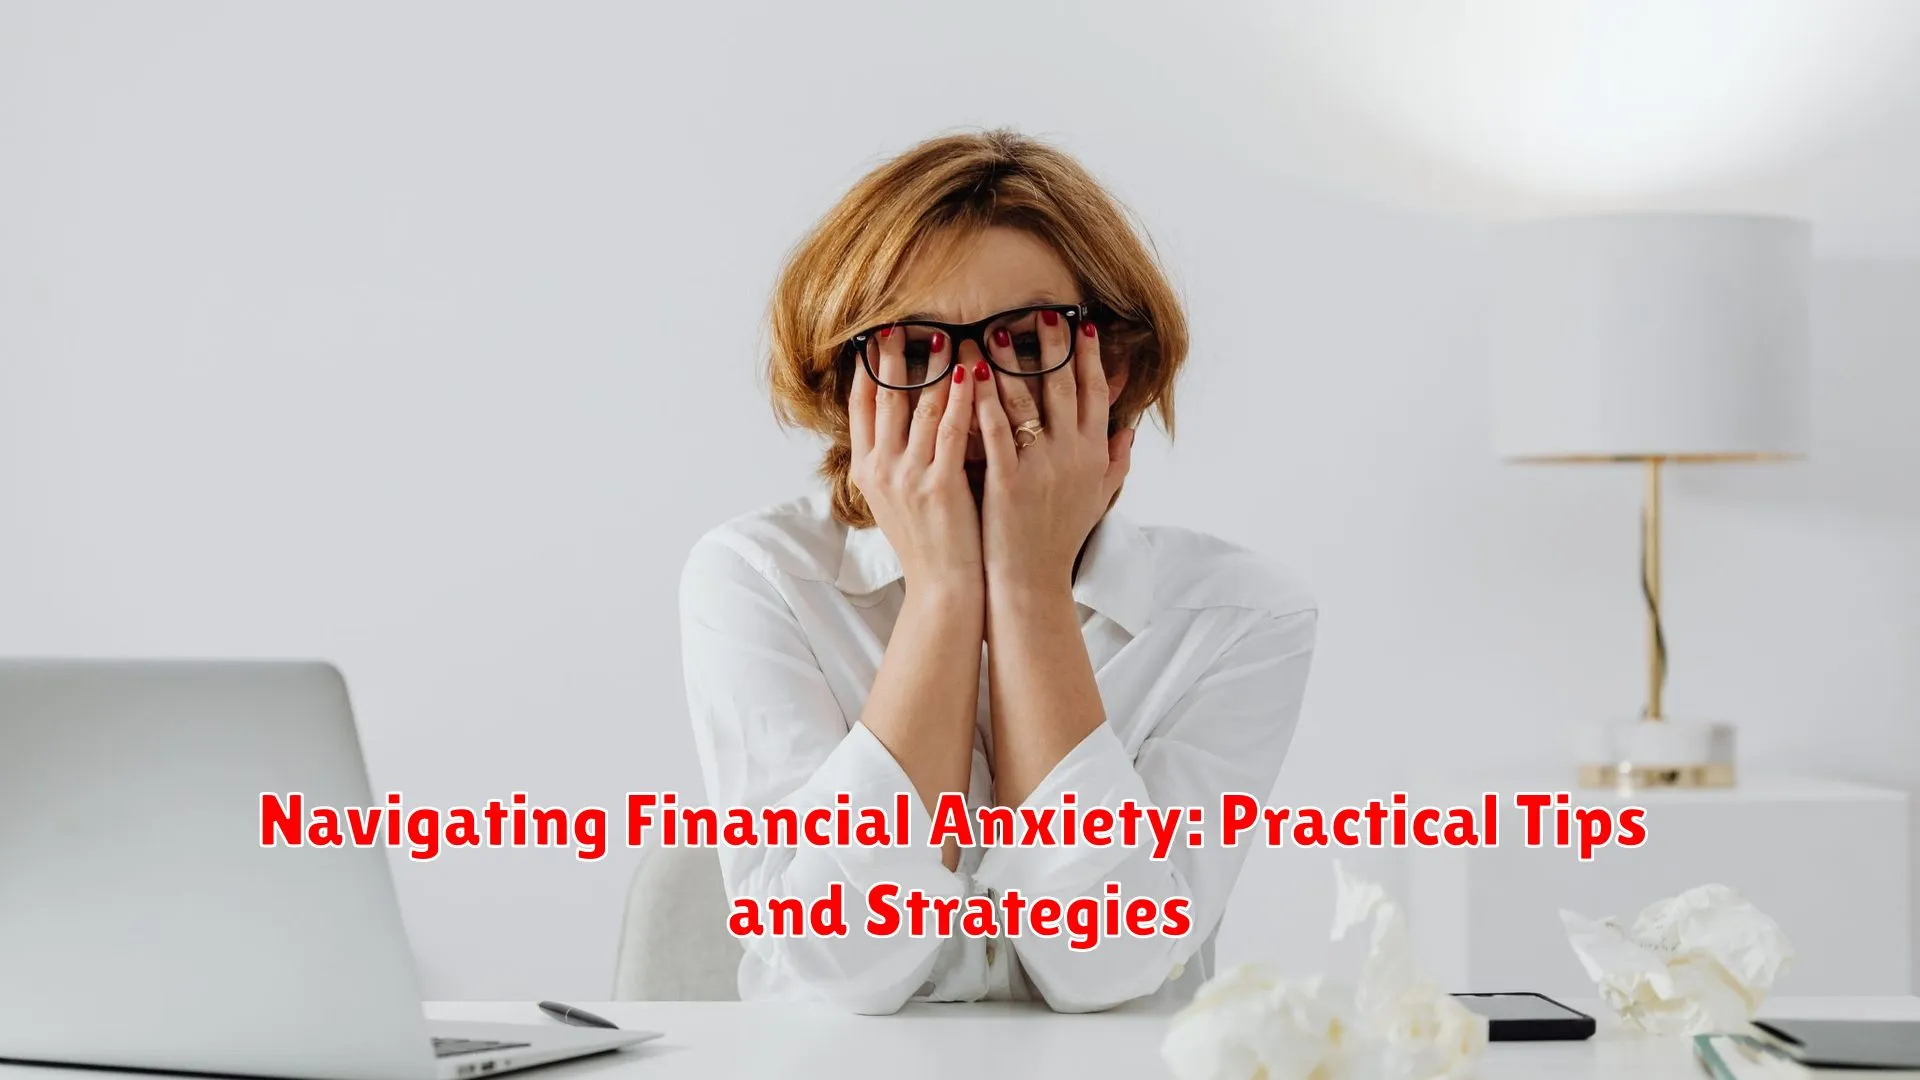 Navigating Financial Anxiety: Practical Tips and Strategies